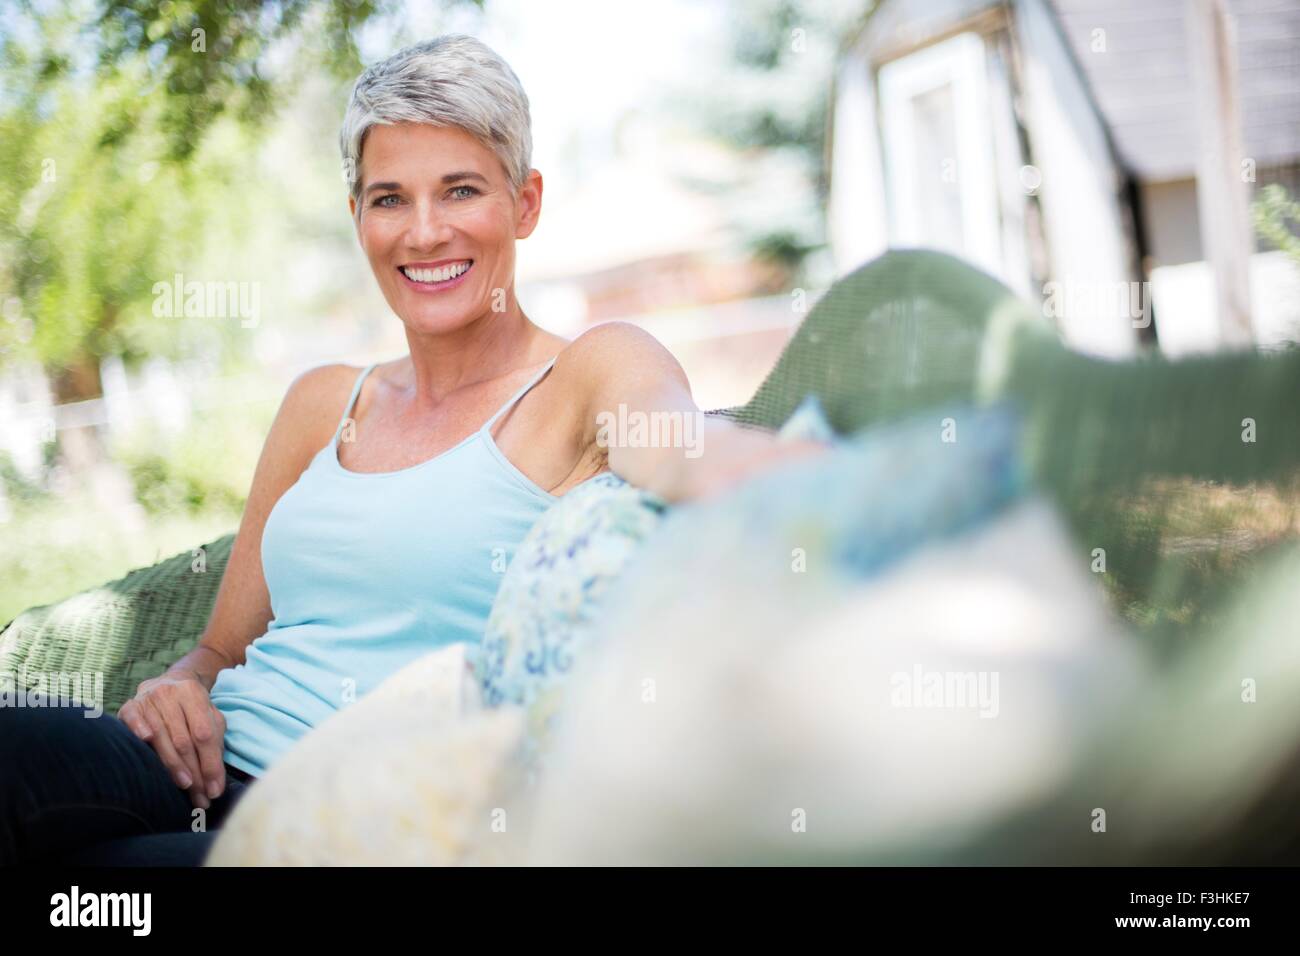 Portrait of mature woman relaxing on garden seat Stock Photo